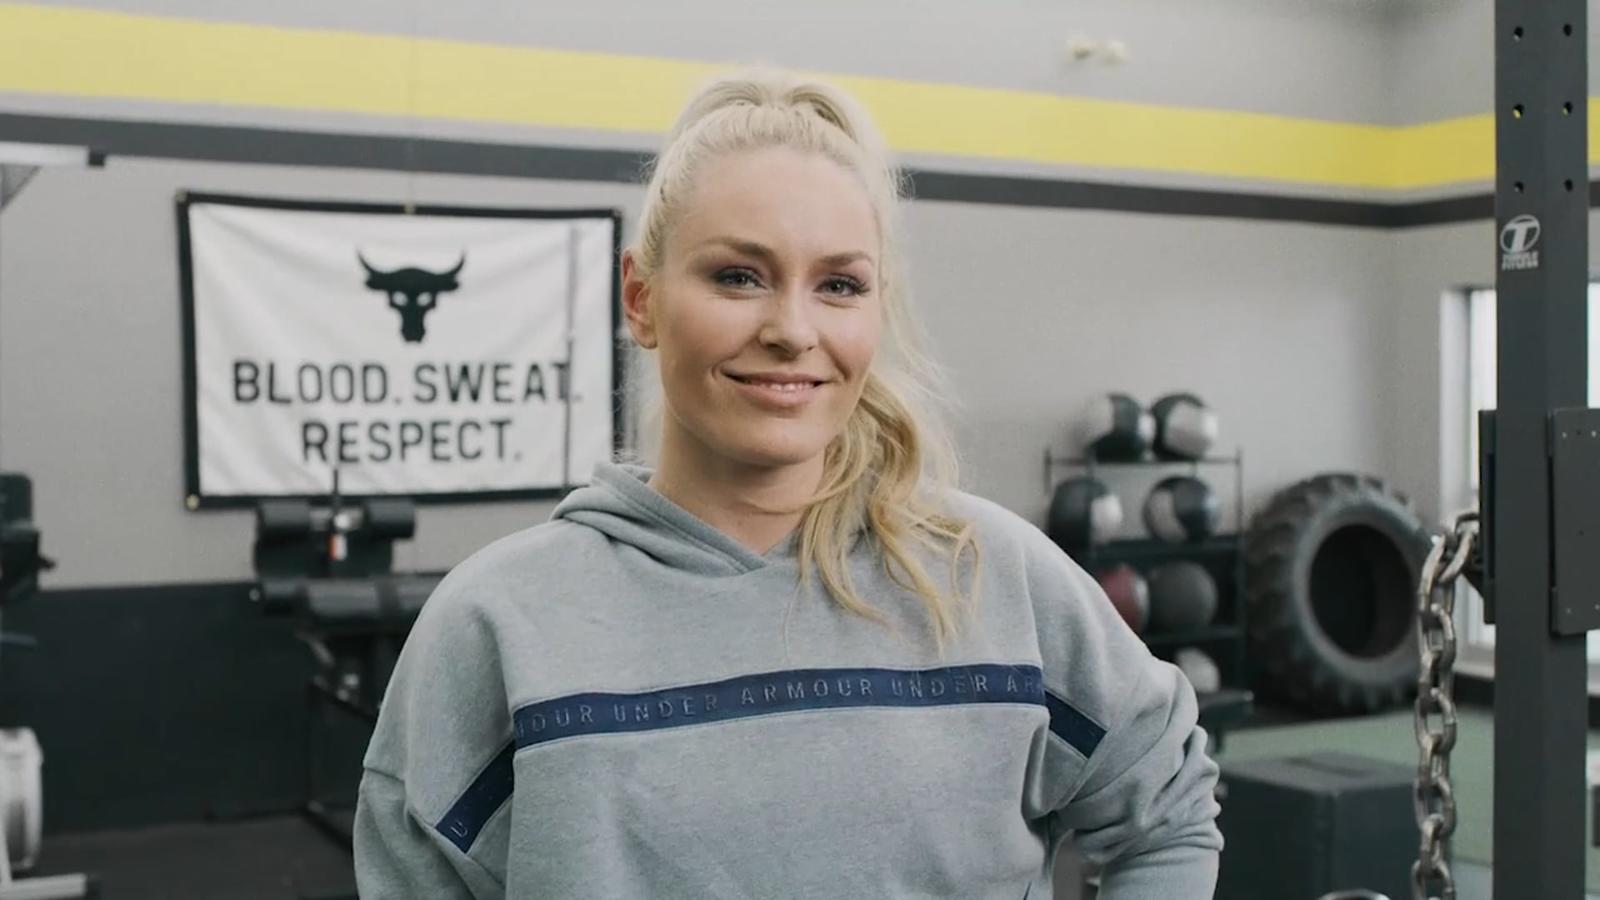 Project Rock, a collaboration between Dwayne Johnson and Under Armour, welcomes Lindsey Vonn as a global ambassador.